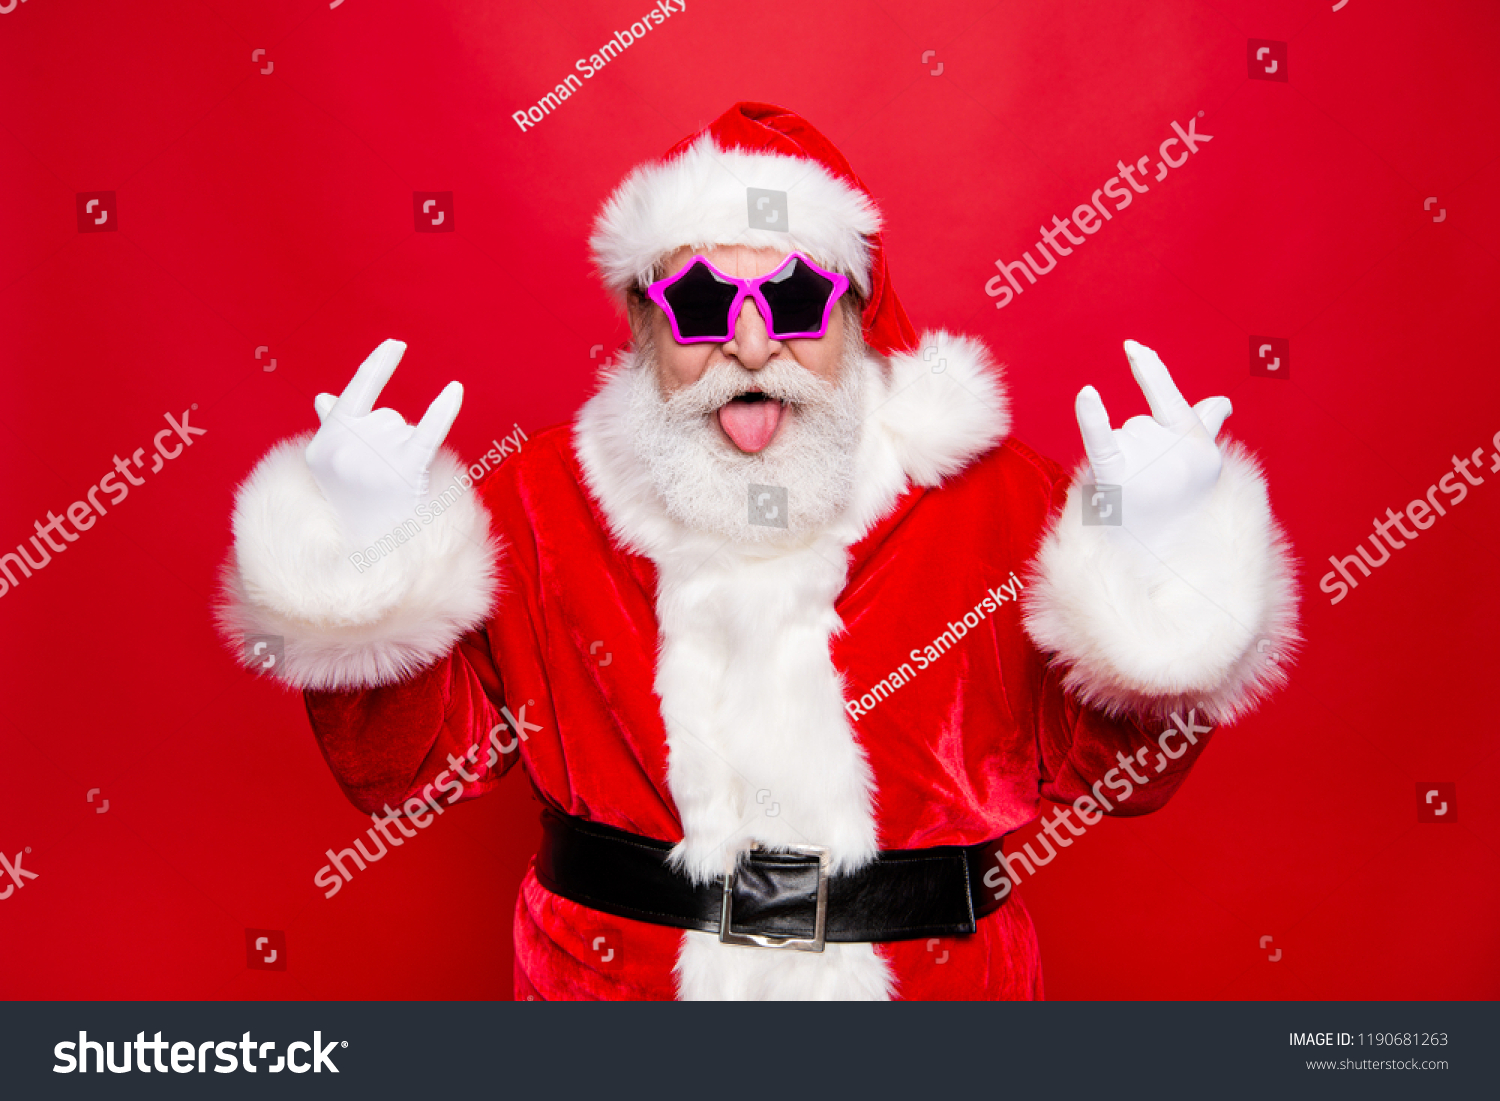 Time to dance on heavy metal disco music! Mature grandfather Santa in costume glasses with playful mood fooling around show tongue out make rock n roll sign isolated december noel red background #1190681263